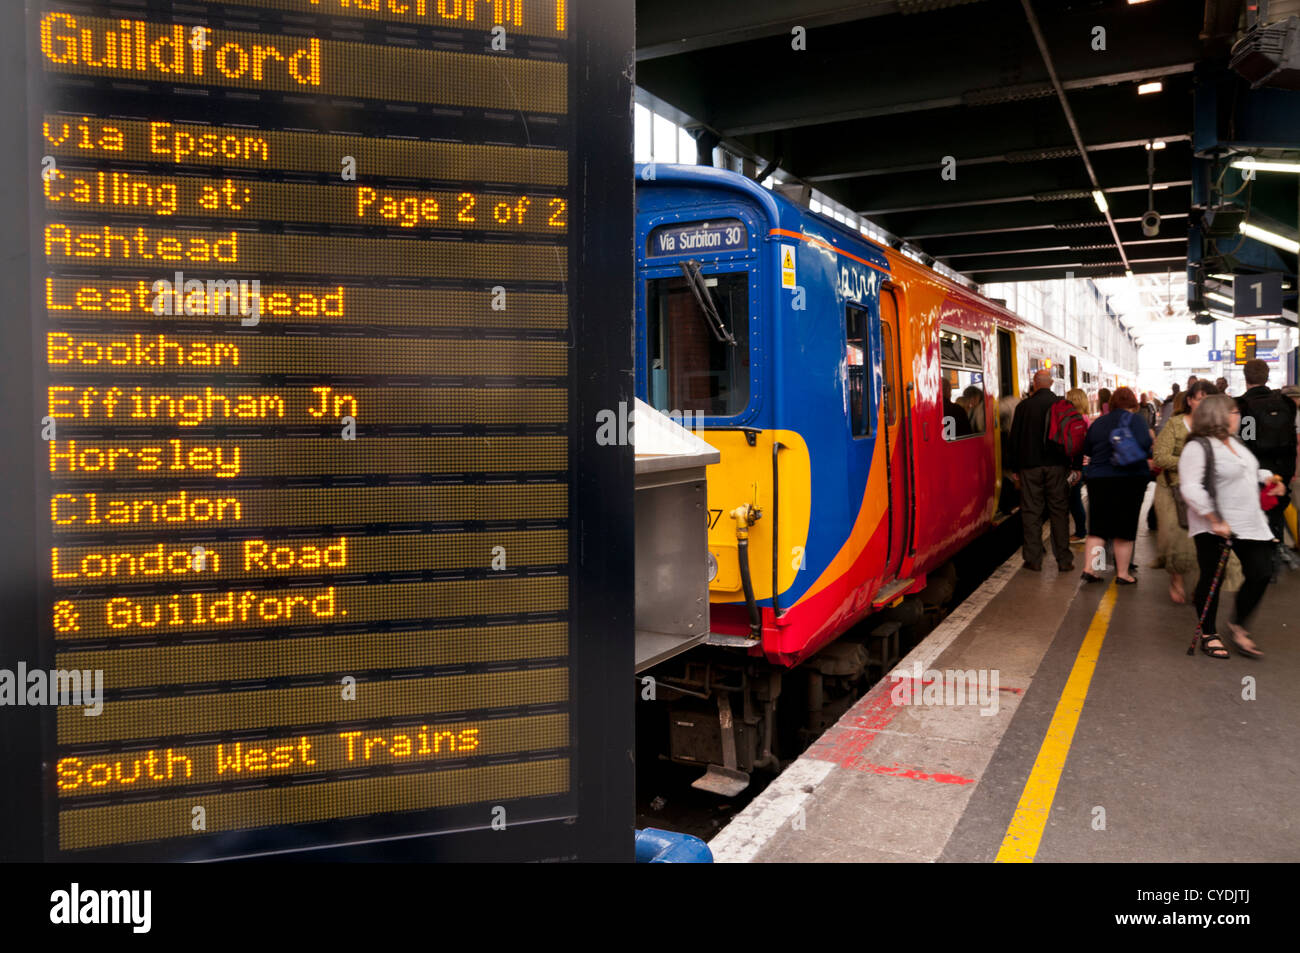 Southwest Train for Guildford at London Waterloo Station, London, UK Stock Photo